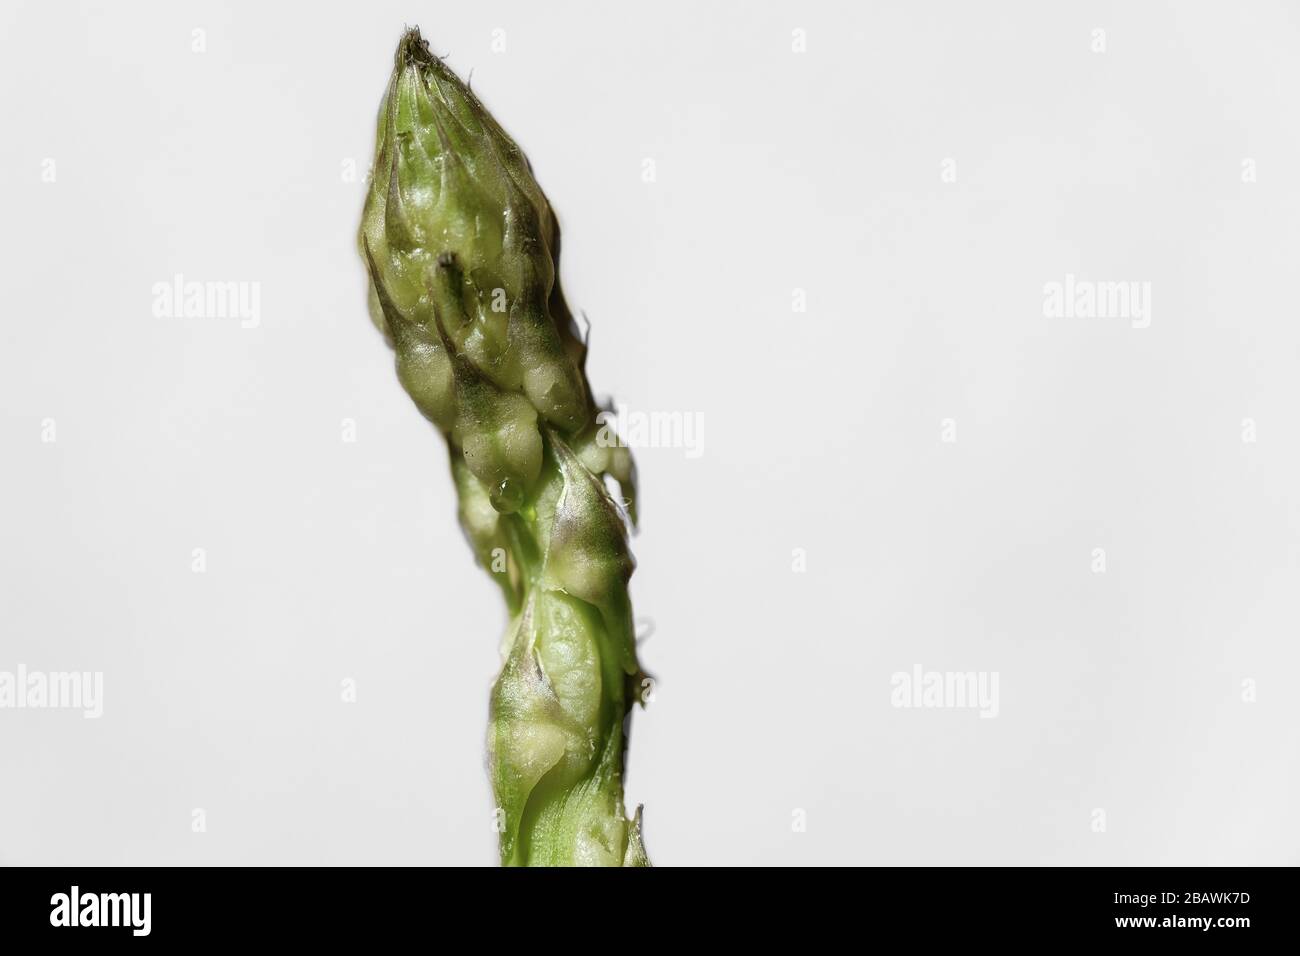 Isolated wild italian asparagus on bright background,genuine healthy food Stock Photo